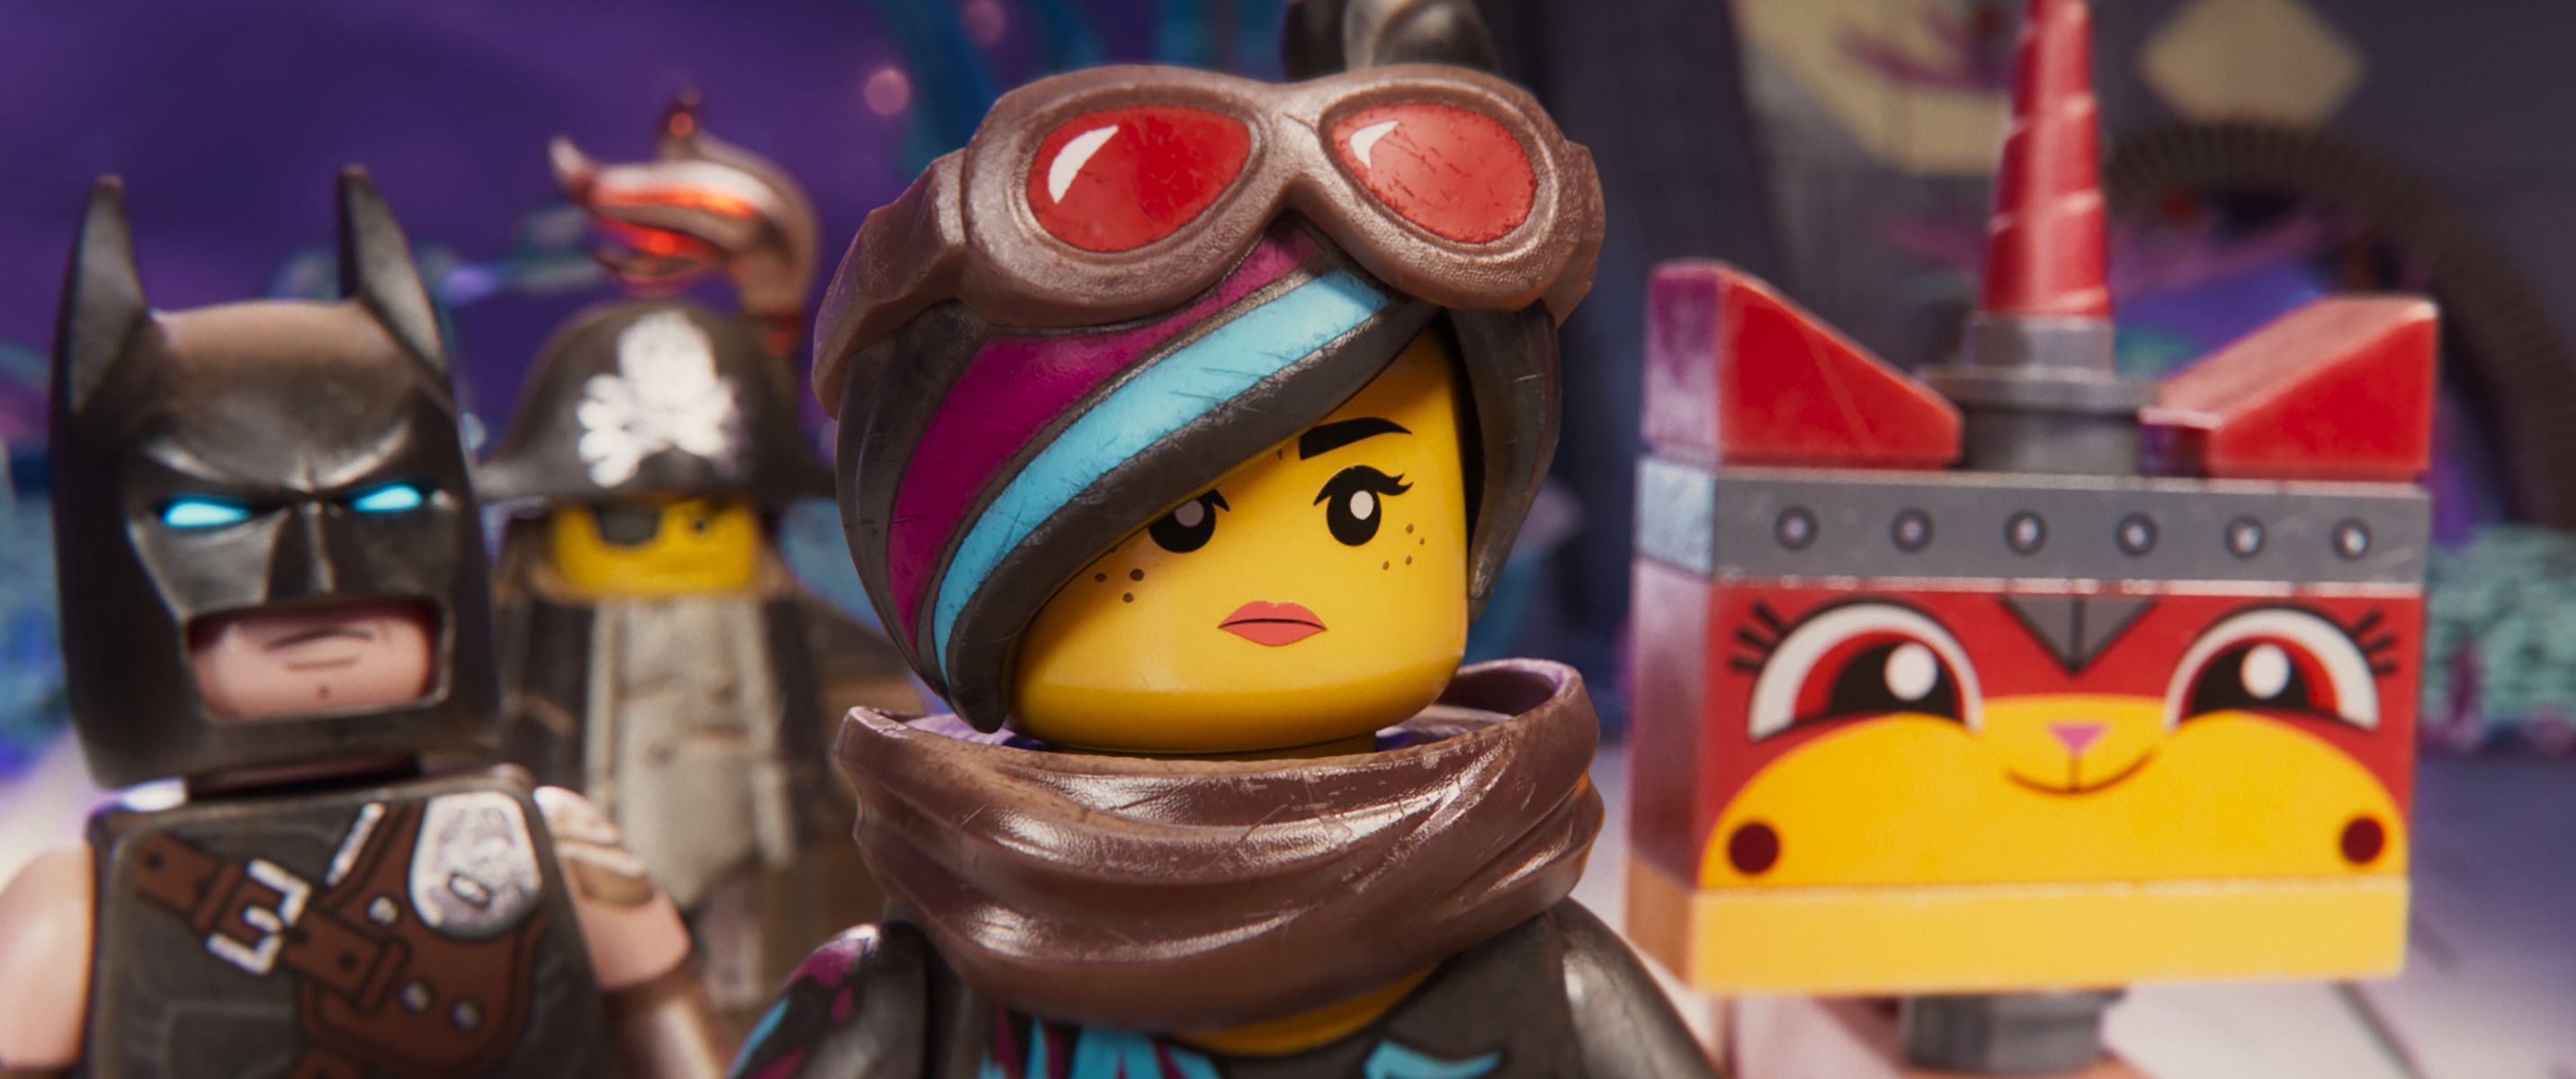 Lego 2' review: Sequel doesn't hold together as well first part | CNN